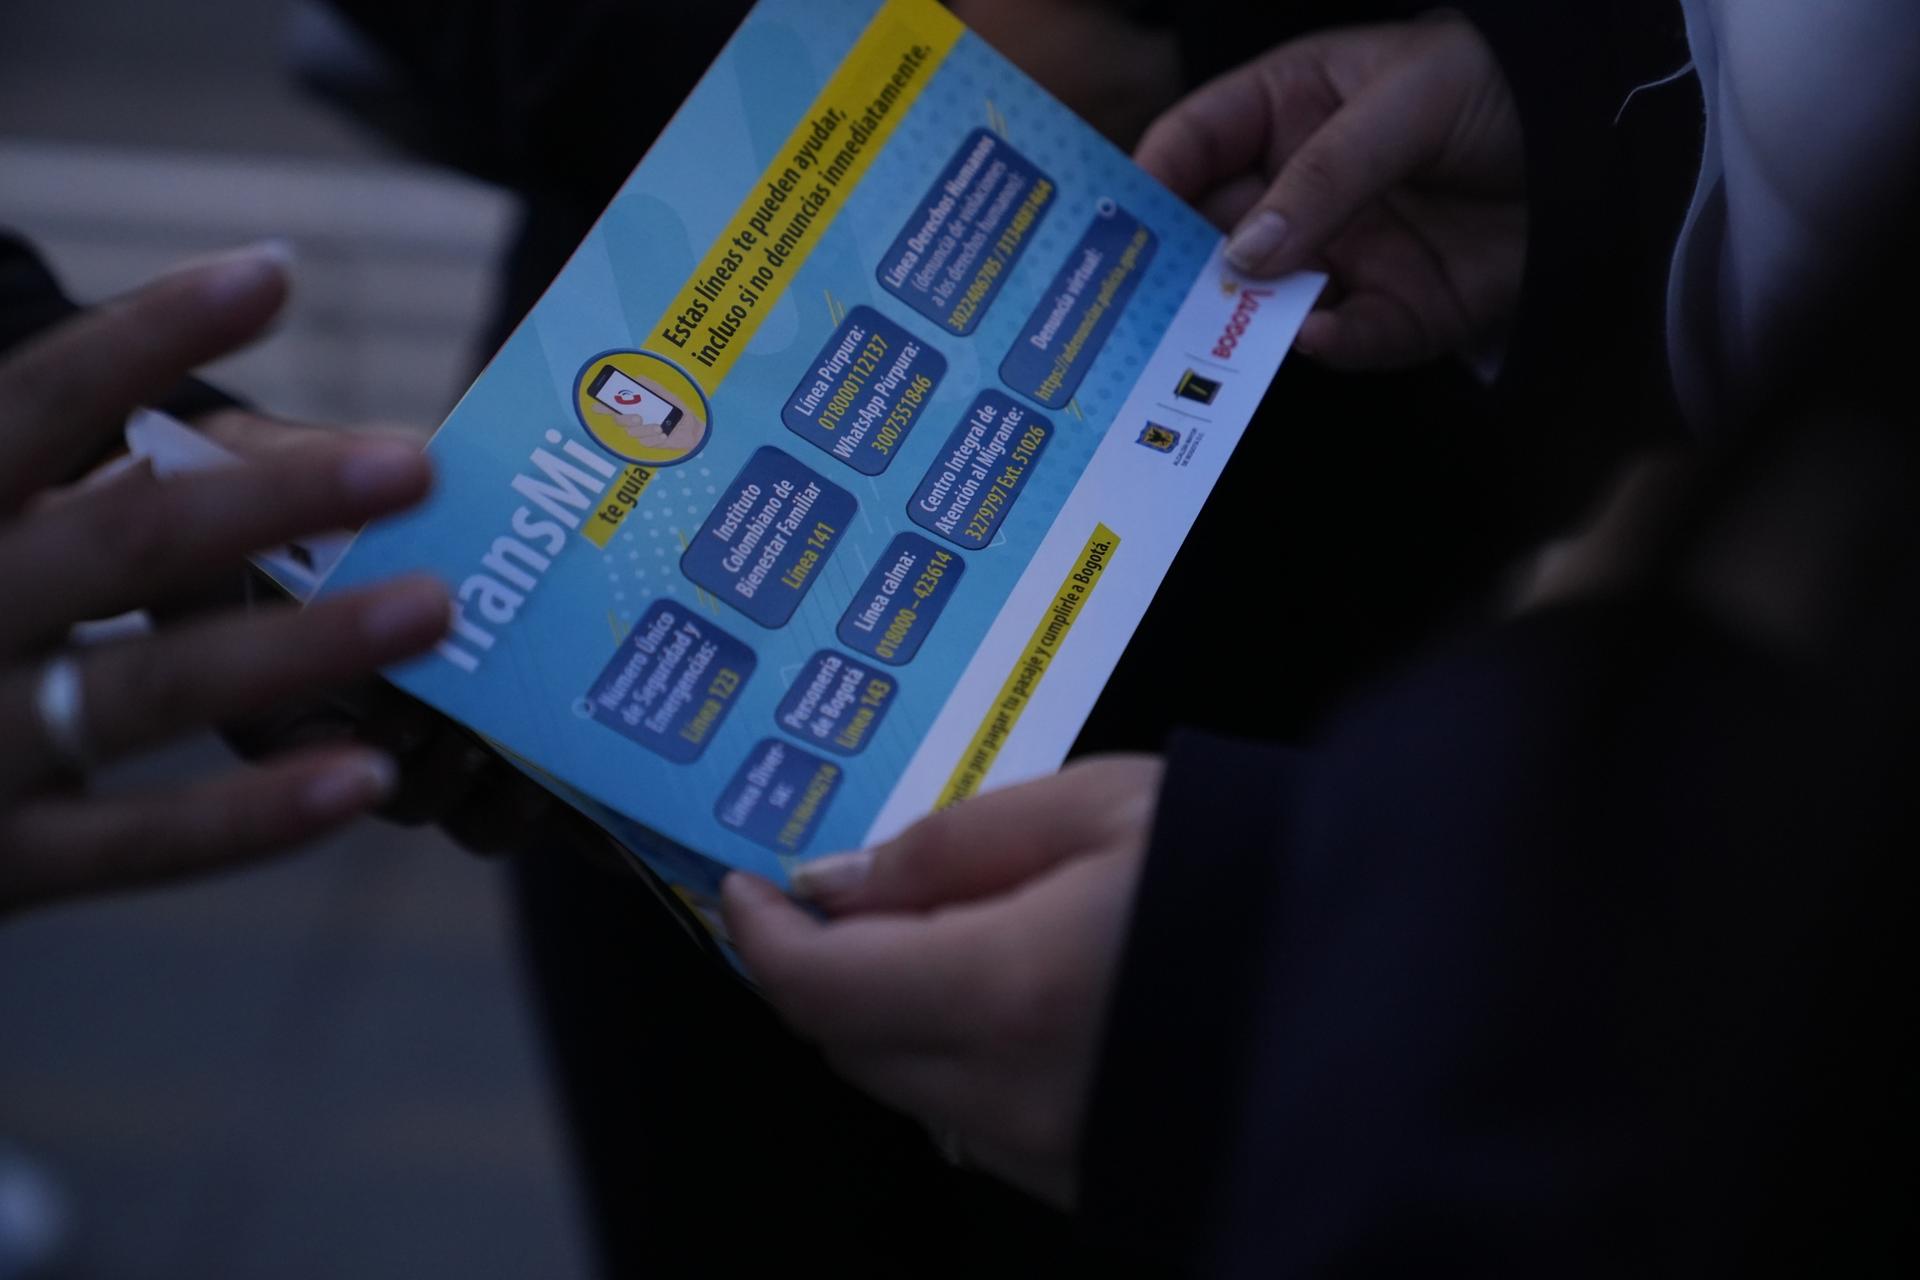 The leaflets that police officers hand out, include information about hotlines that women can call if they are harassed.